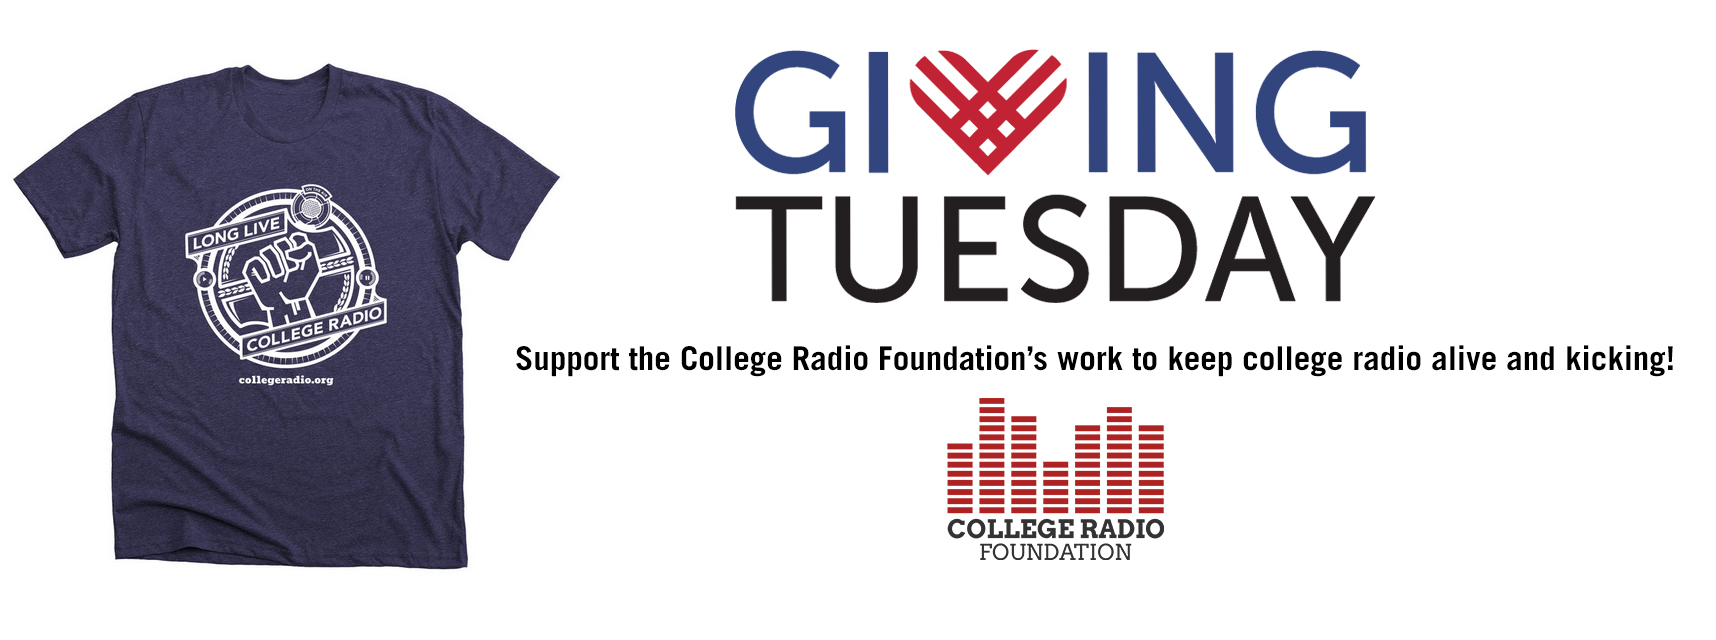 It’s #GivingTuesday and we need your support!